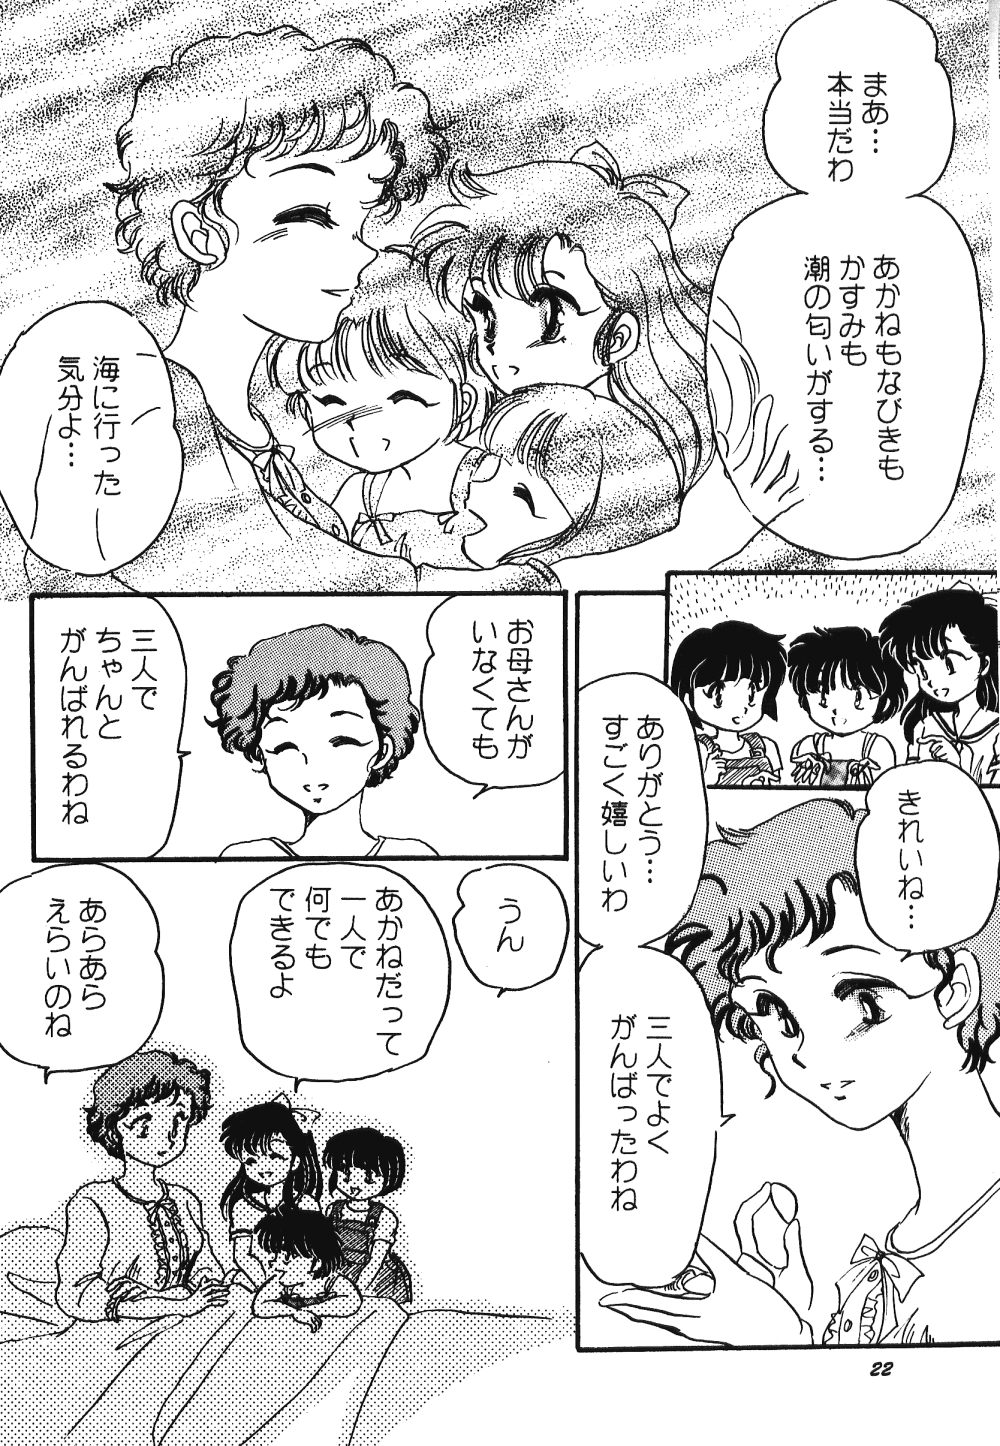 Never Forget Summer (Ranma 1/2) 20